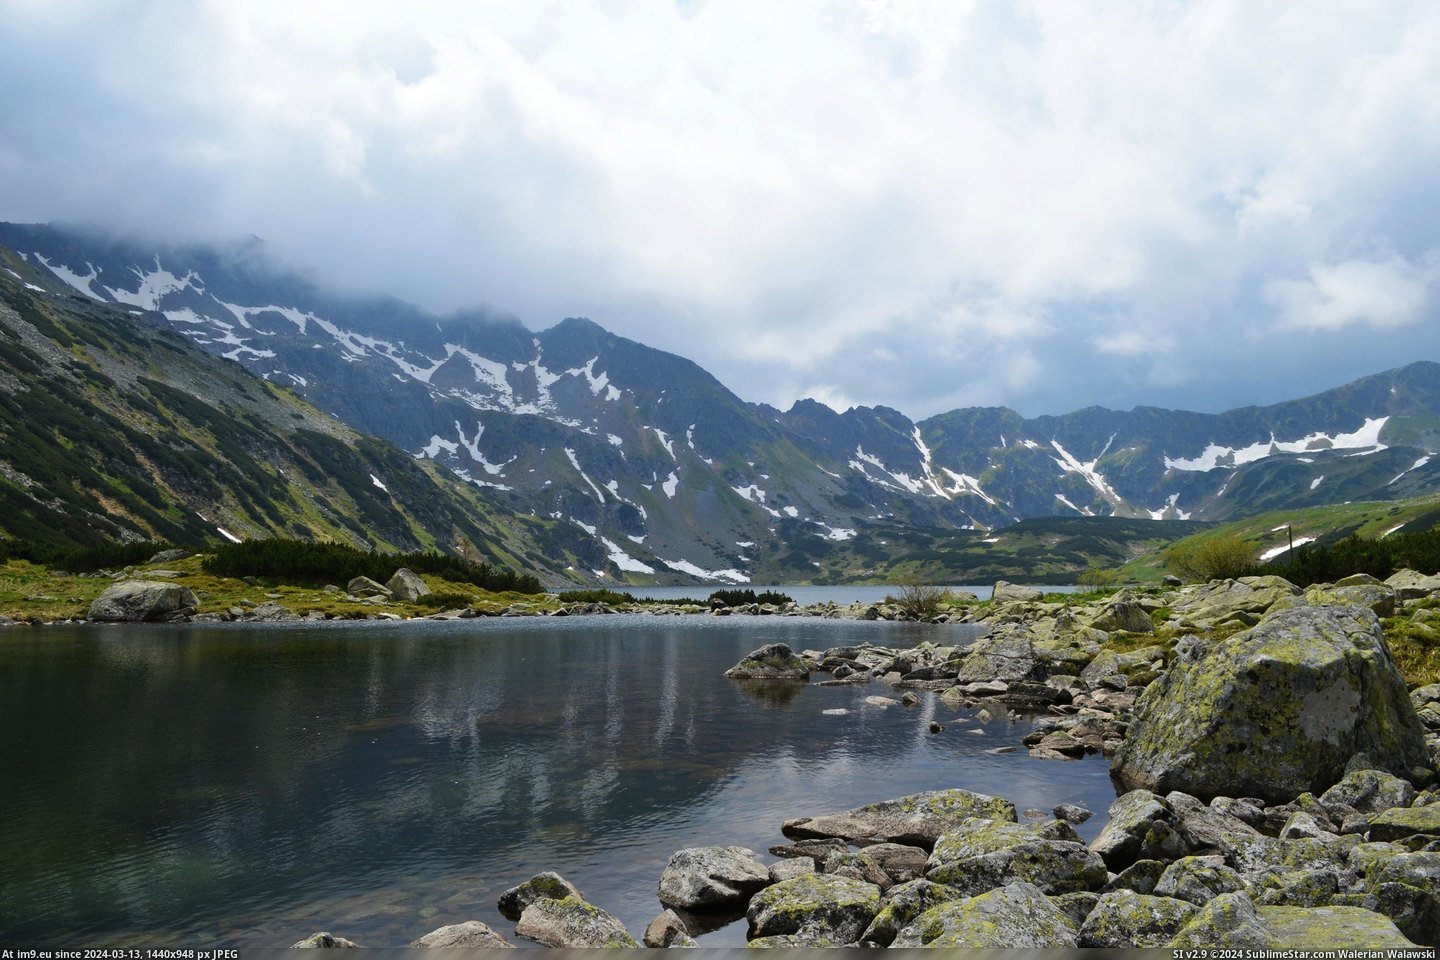 #Valley #Early #2956x1958 #Polish #Lakes [Earthporn] Valley of the Five Polish Lakes in the early June [2956x1958] Pic. (Image of album My r/EARTHPORN favs))